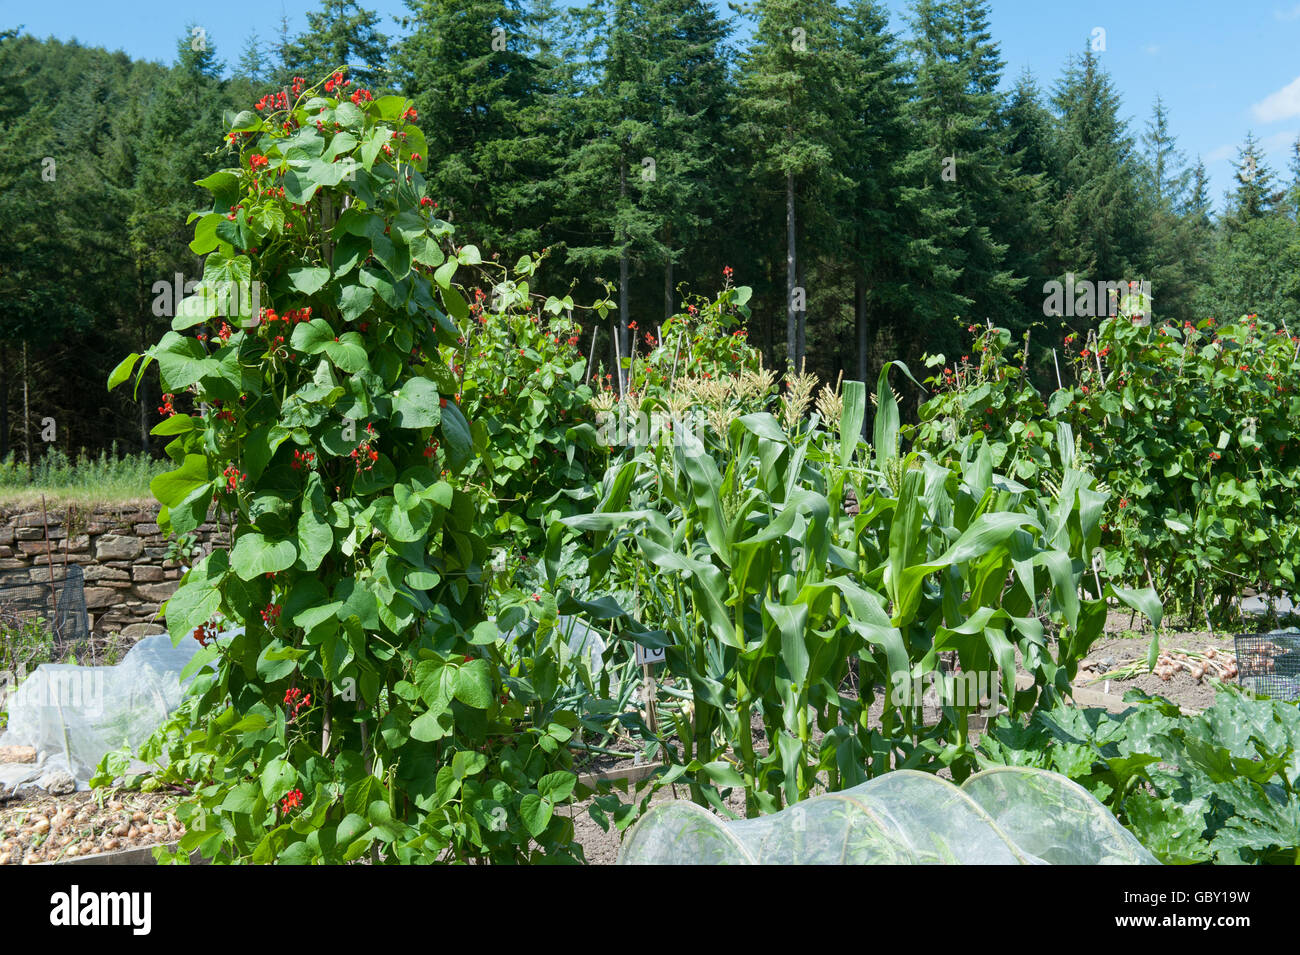 Wigwam of Runner Beans (Phaseolus coccineus) and Maize (Zea mays) in an Allotment Garden at Rosemoor in Devon,England,UK Stock Photo